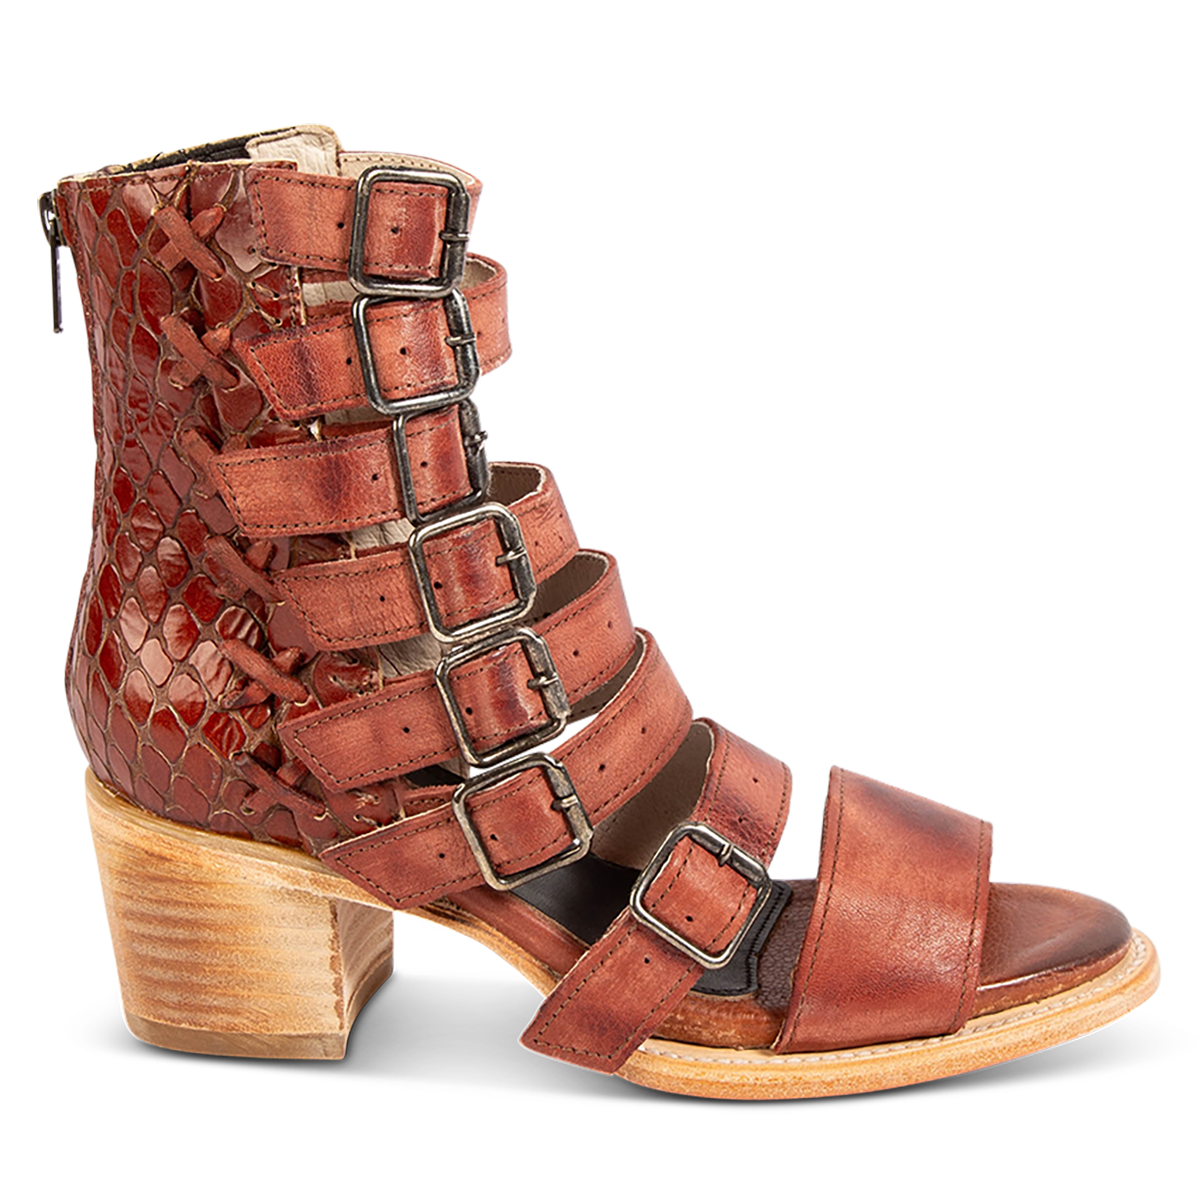 FREEBIRD women's Country rust snake multi embossed leather sandal with adjustable leather straps, a working brass zipper and gore detailing